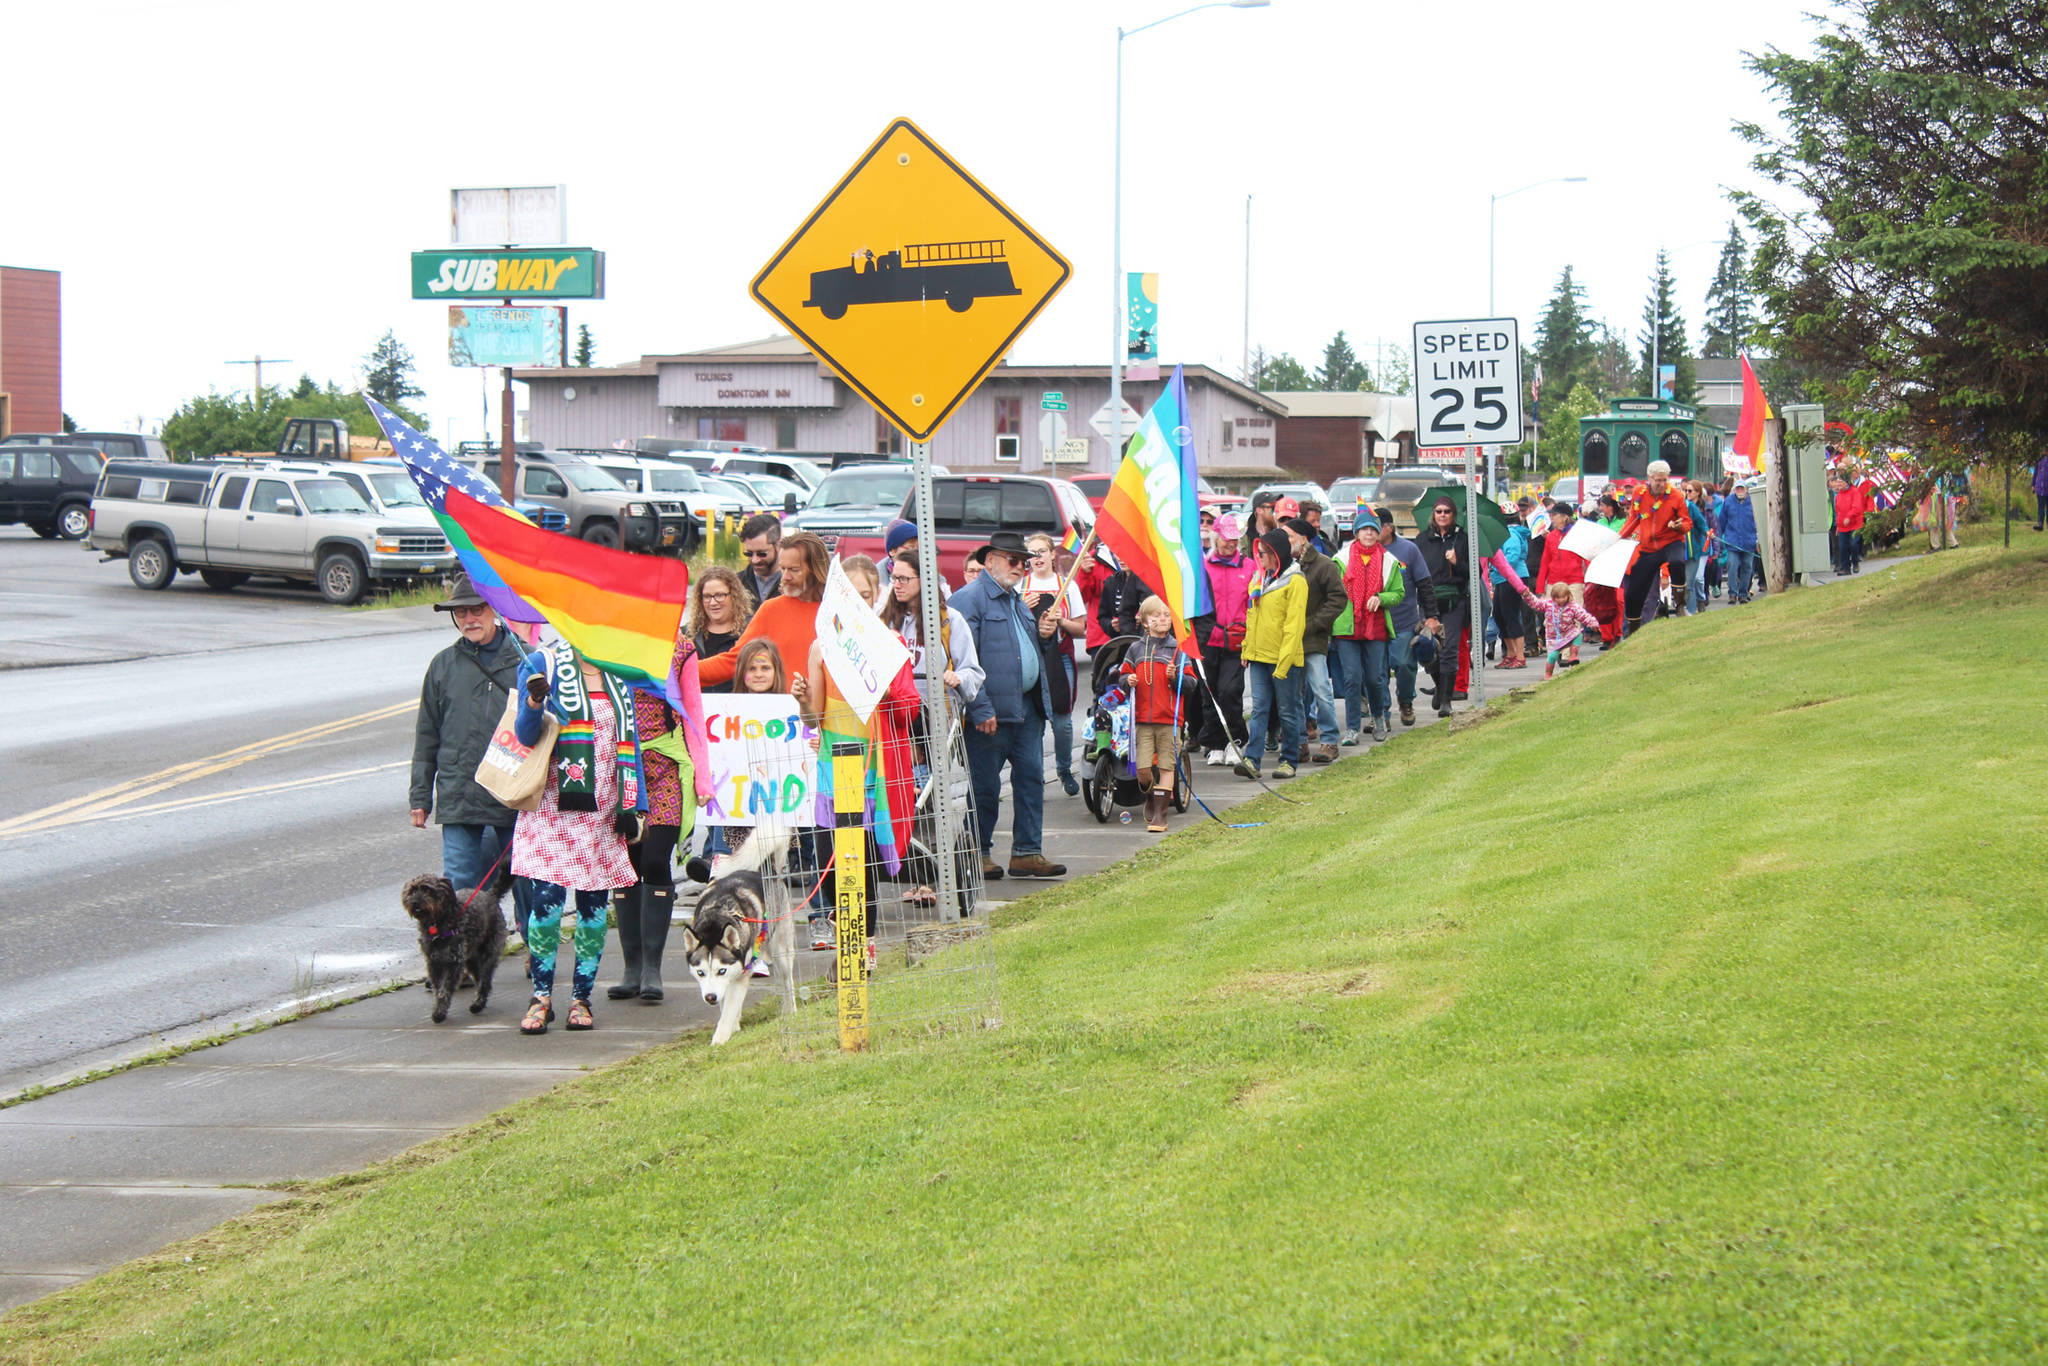 Participant’s in Homer’s first ever Pride March start out from WKFL Park along Pioneer Avenue on Saturday, June 23, 2018 in Homer, Alaska. The march route went all the way to Grace Ridge Brewery. (Photo by Megan Pacer/Homer News)